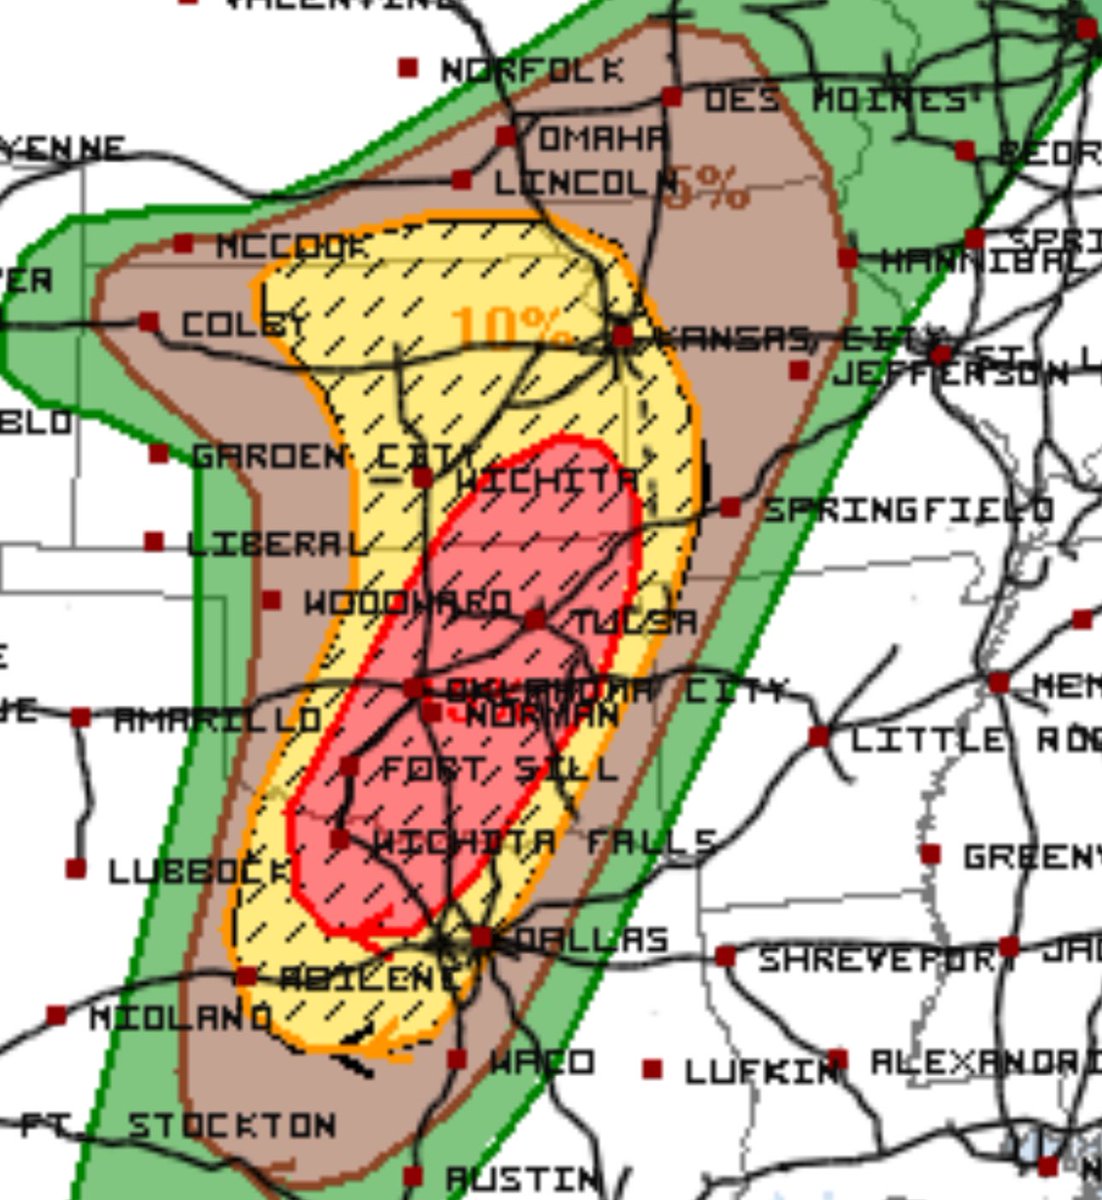 Kansas declares a state of emergency ahead of today’s expected tornadoes! We will be live later as storms fire up this afternoon. 10% hatched (whole Eastern side of the state) is a very high risk, 15% hatched (red area) imis very rare. We will be there with our team ready to